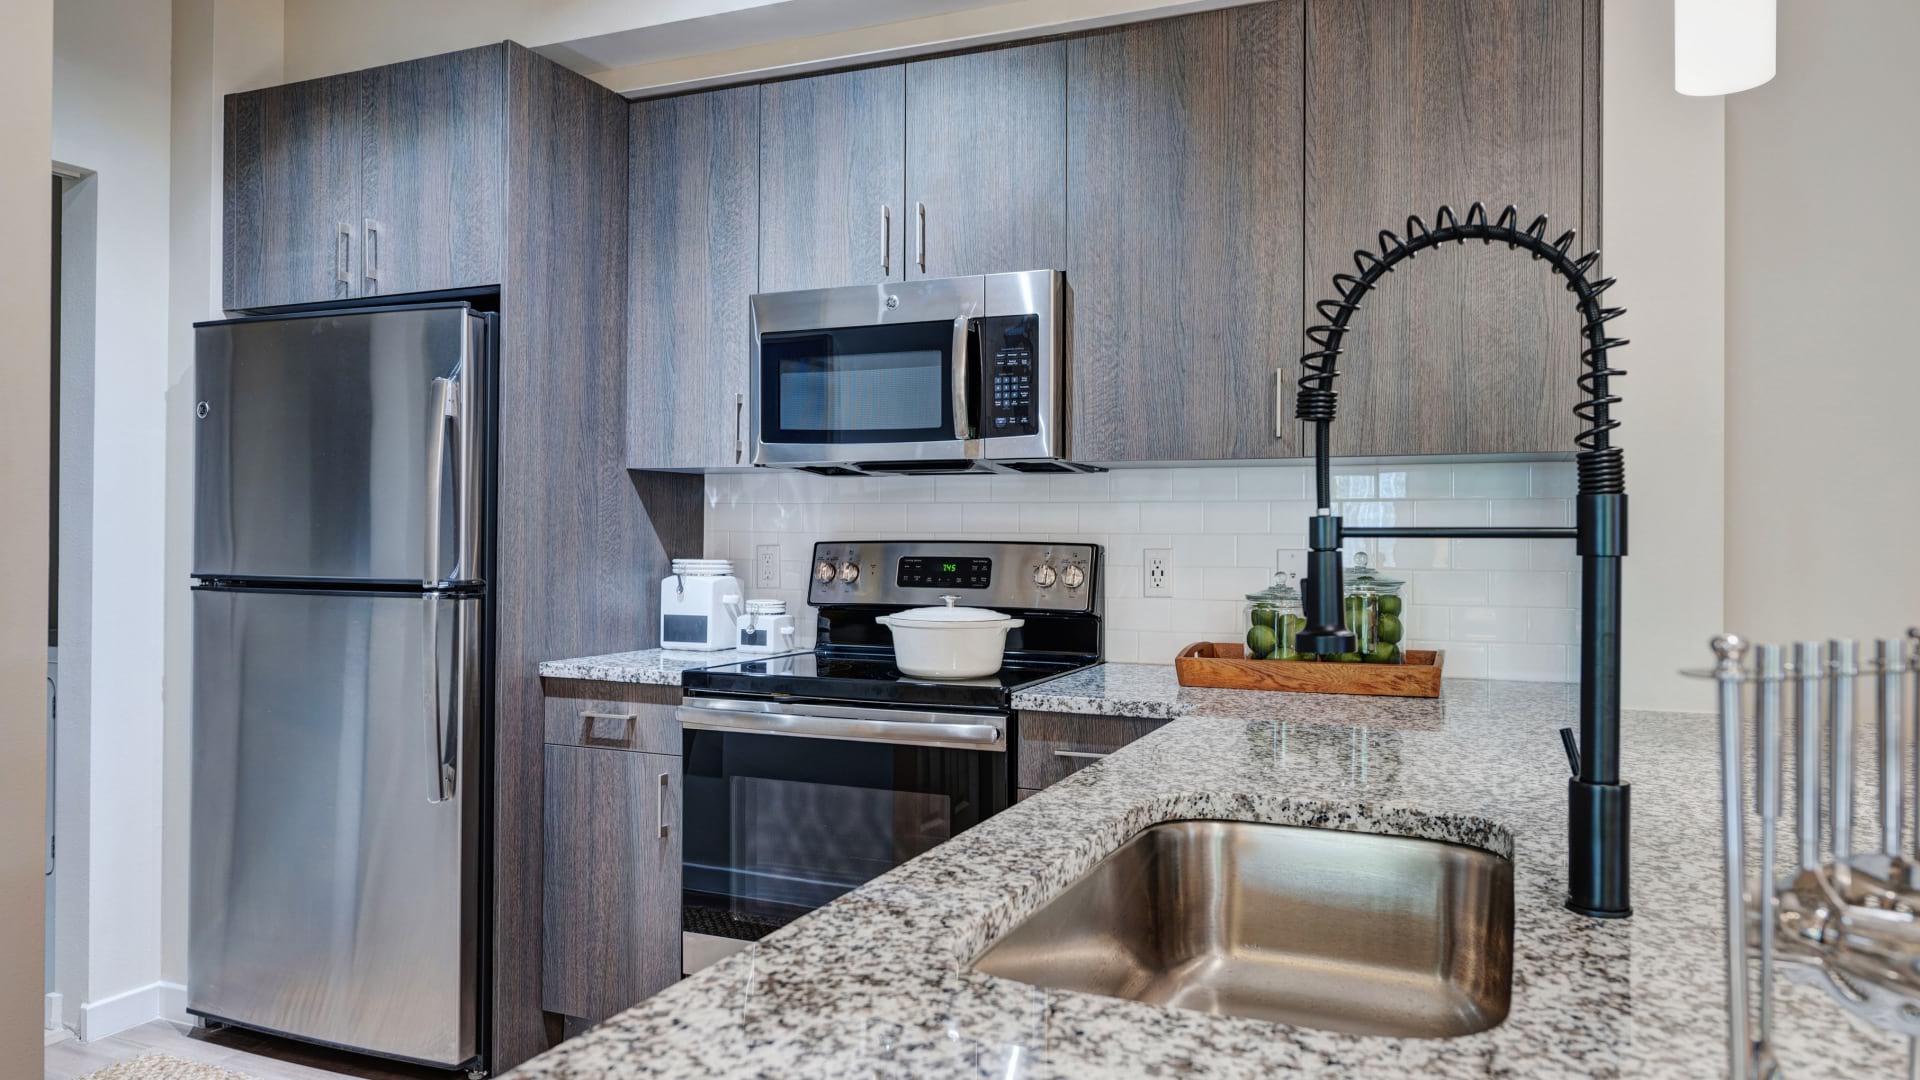 Kitchen With Stainless Steel Appliances at Our Cortland Hollywood Beach Apartments